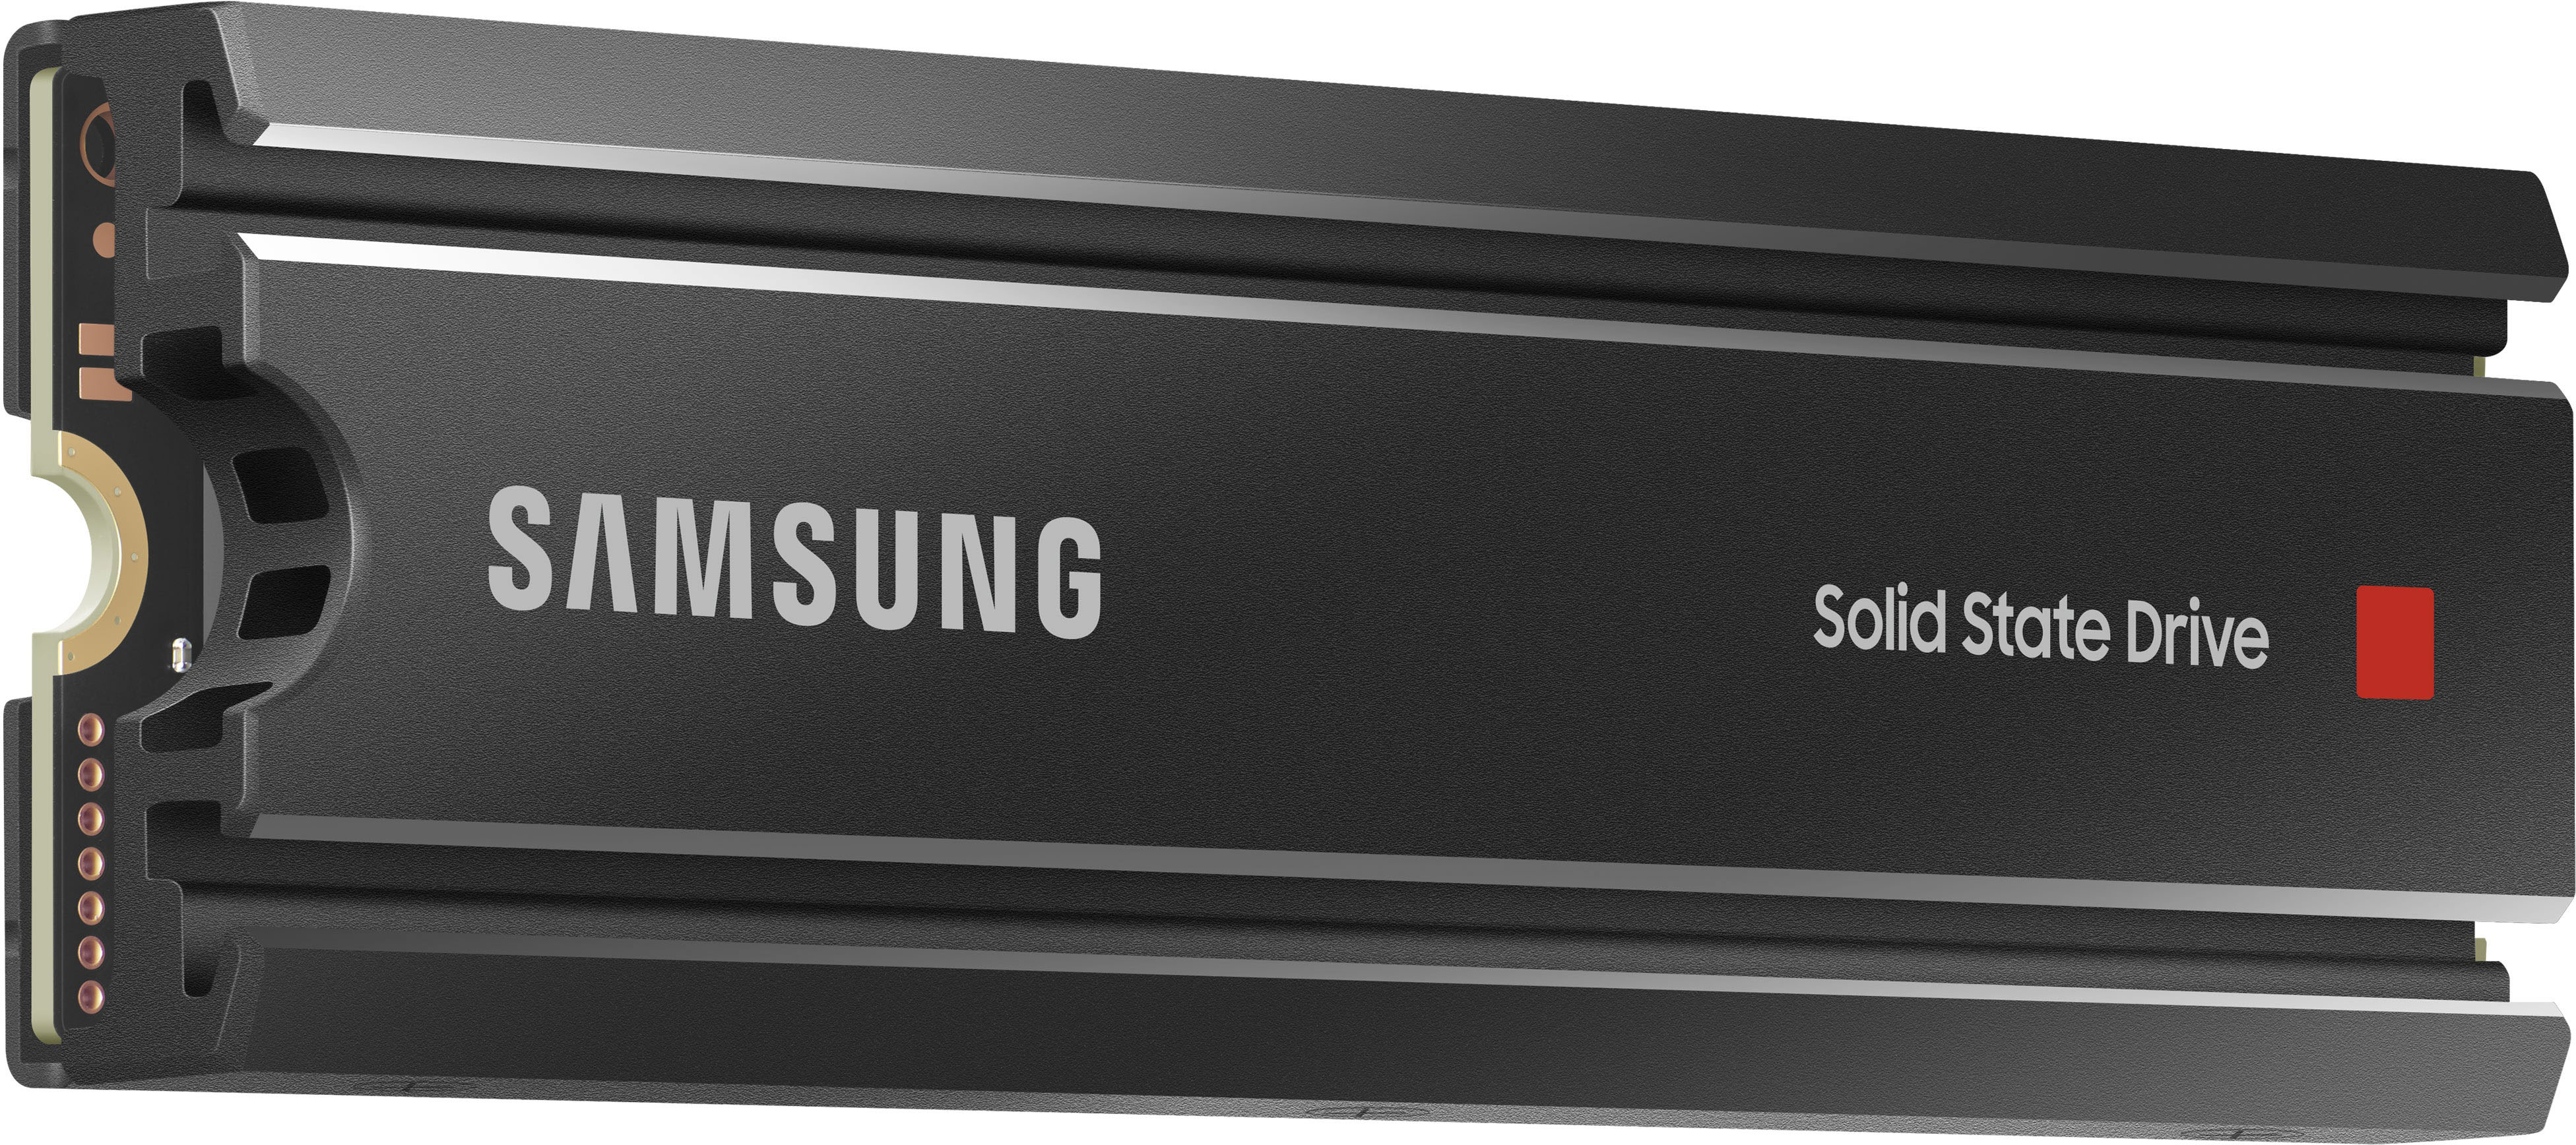 SAMSUNG 980 PRO SSD 2TB PCIe NVMe Gen 4 Gaming M.2 Internal Solid State  Drive Memory Card + 2mo Adobe CC Photography, Maximum Speed, Thermal  Control